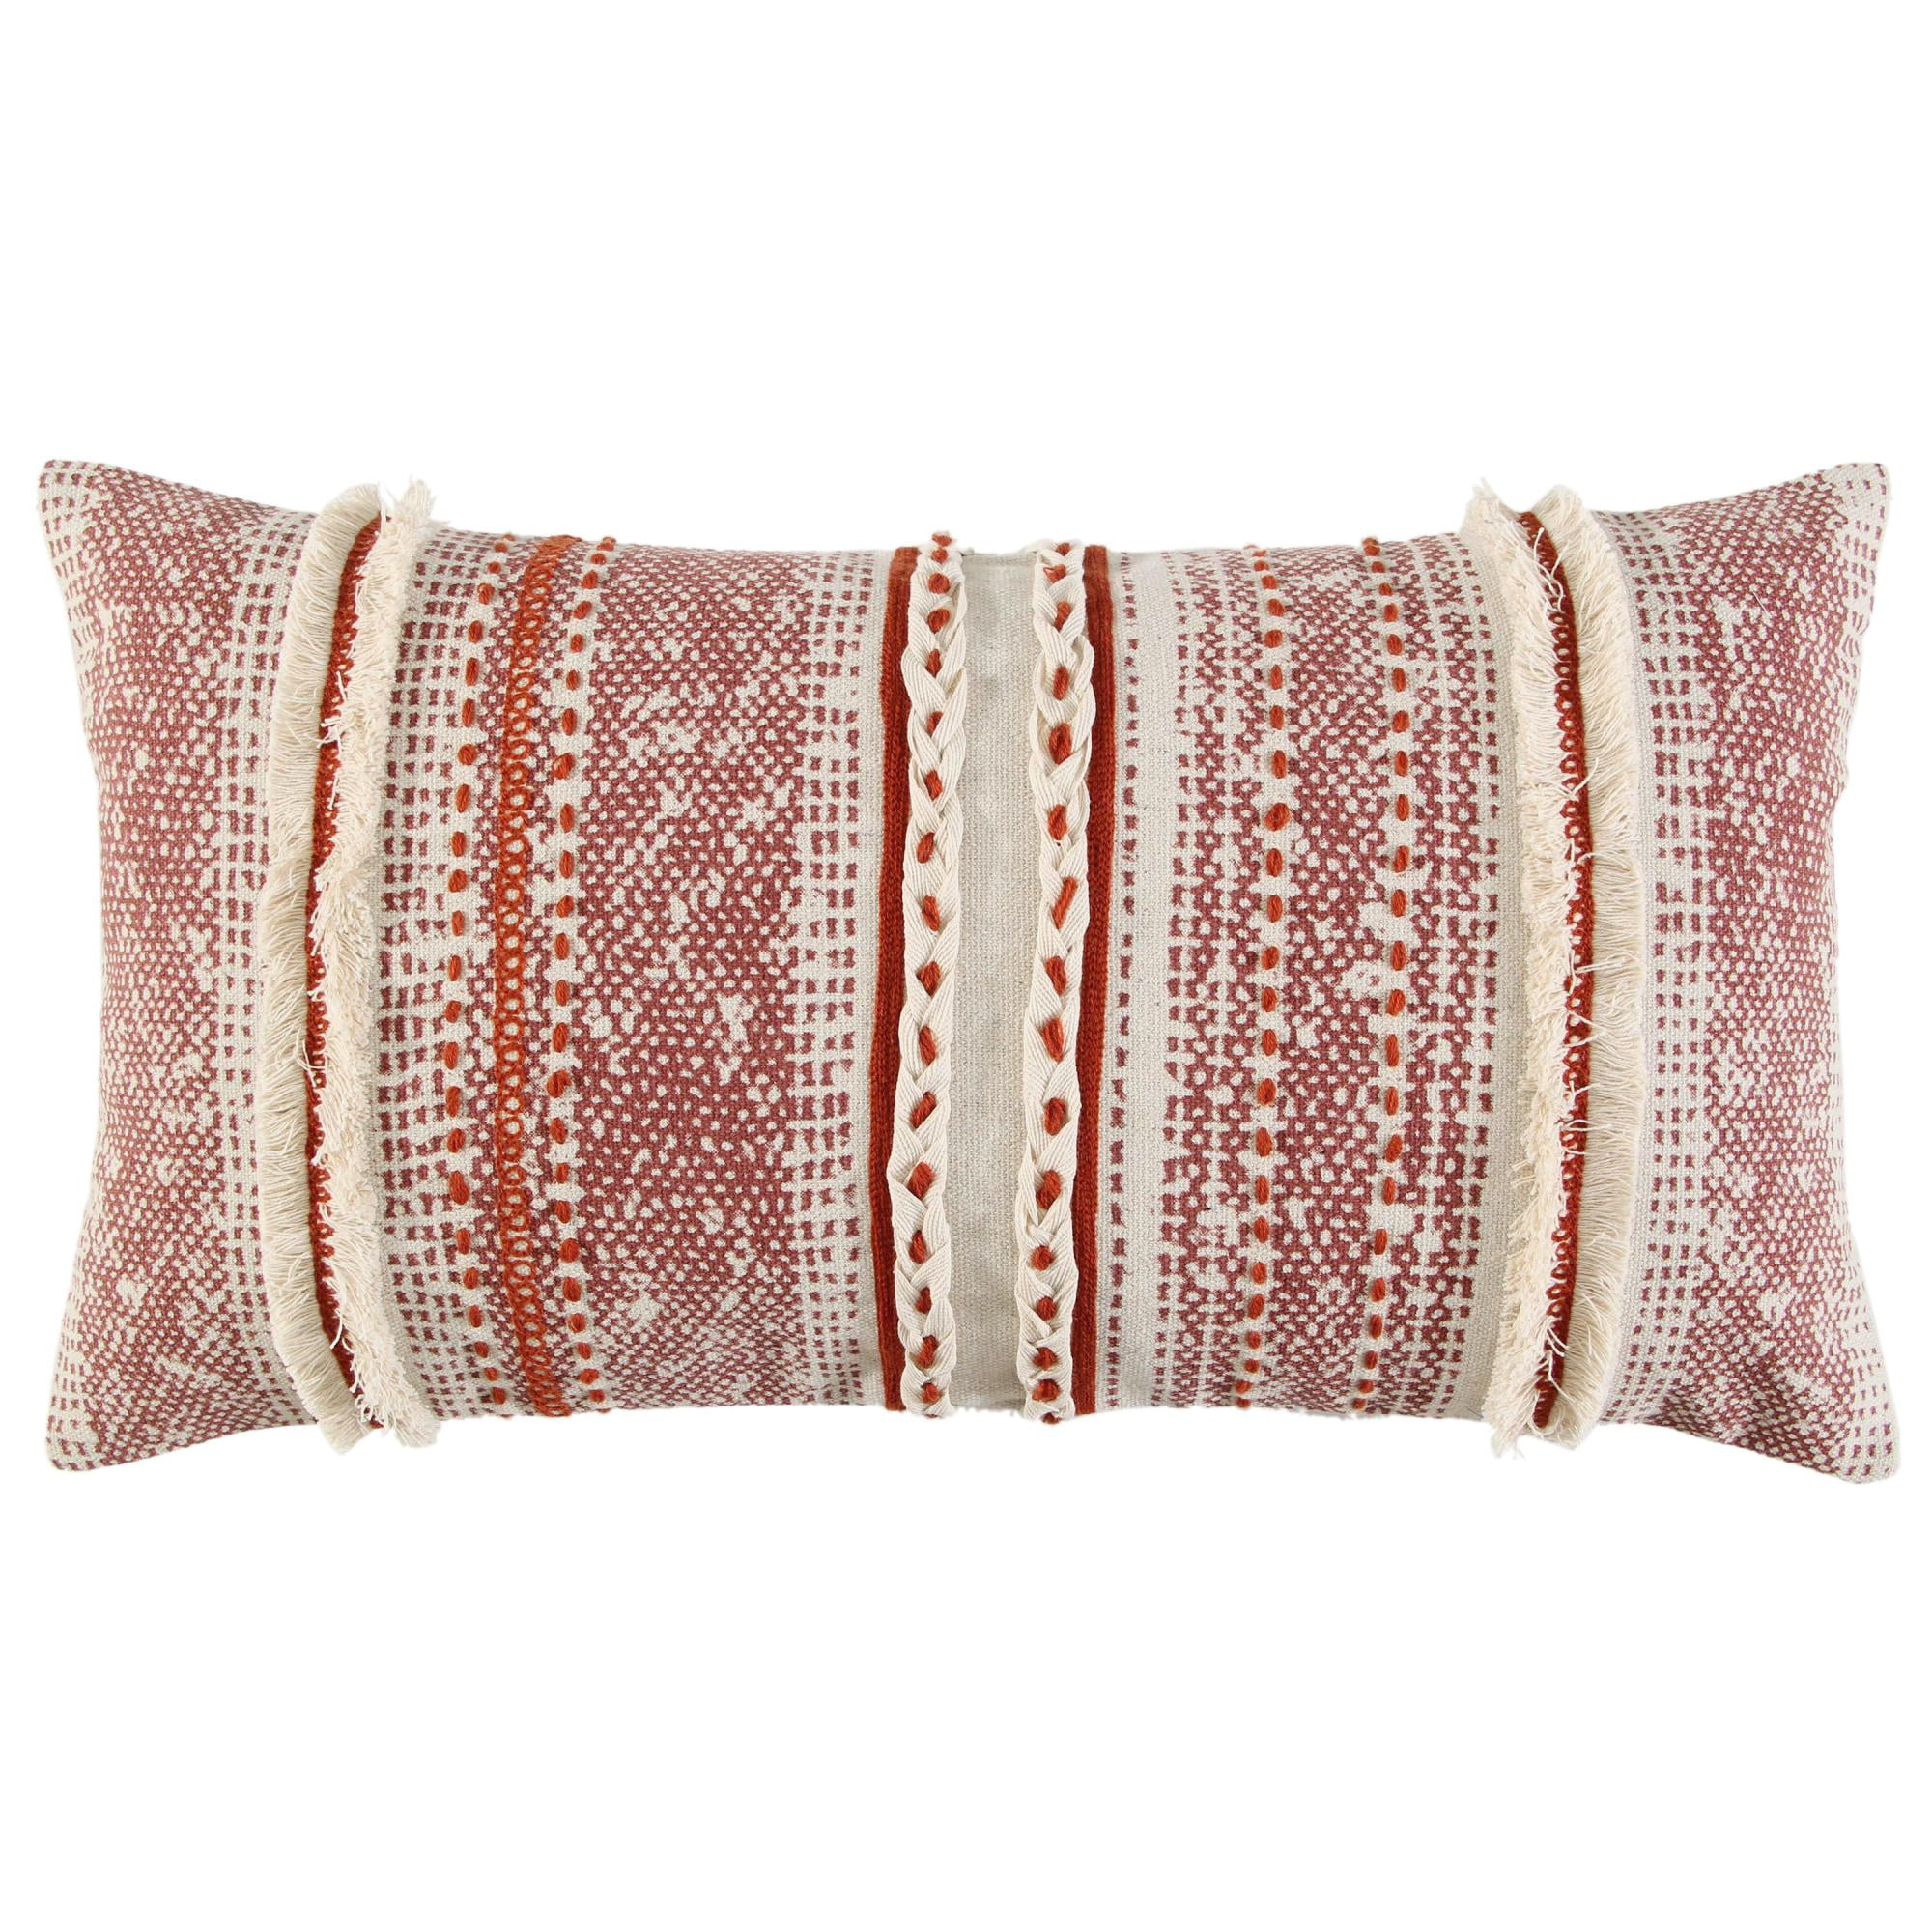 Decorative Maroon 22-inch Throw Pillow Cover Red Applique Bohemian Eclectic Cotton Linen One Removable